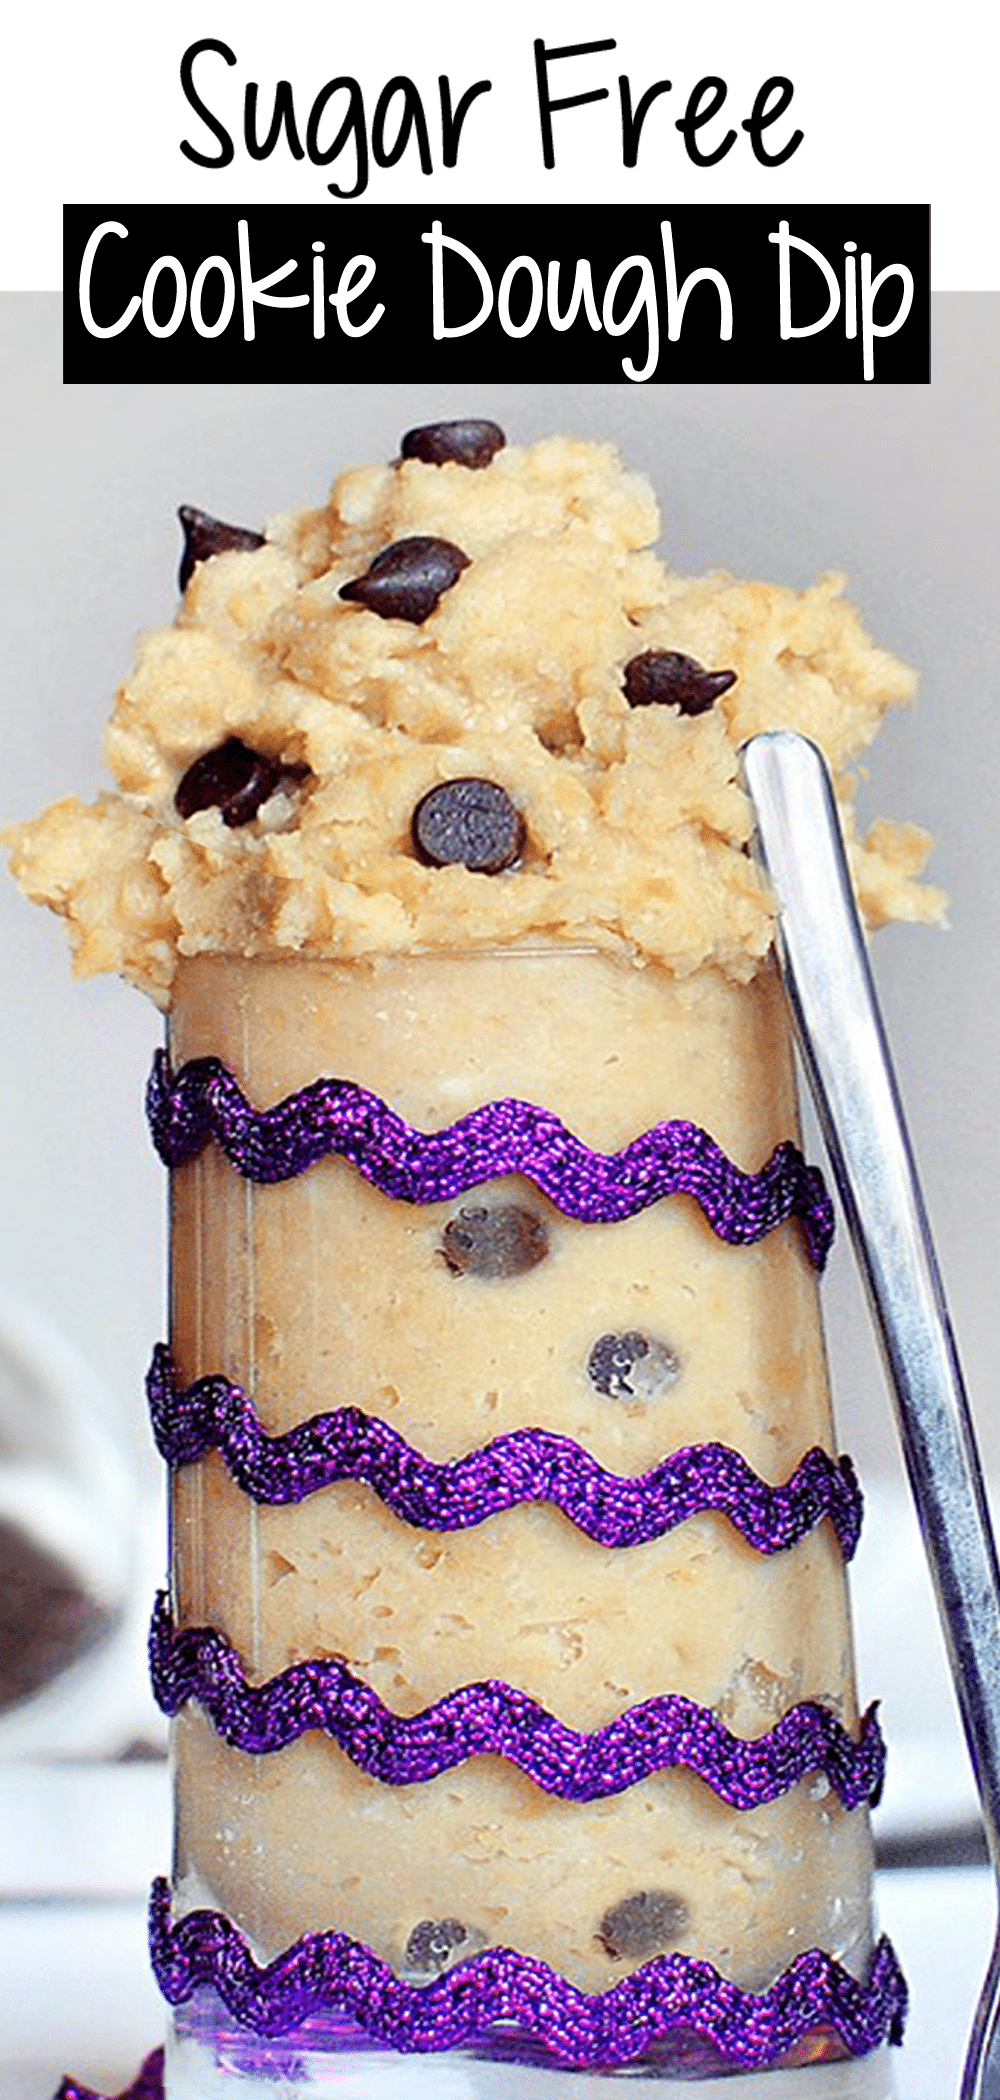 https://chocolatecoveredkatie.com/wp-content/uploads/2011/09/Sugar-Free-Chocolate-Chip-Cookie-Dough-Healthy-Snack-Dip-Recipe.png